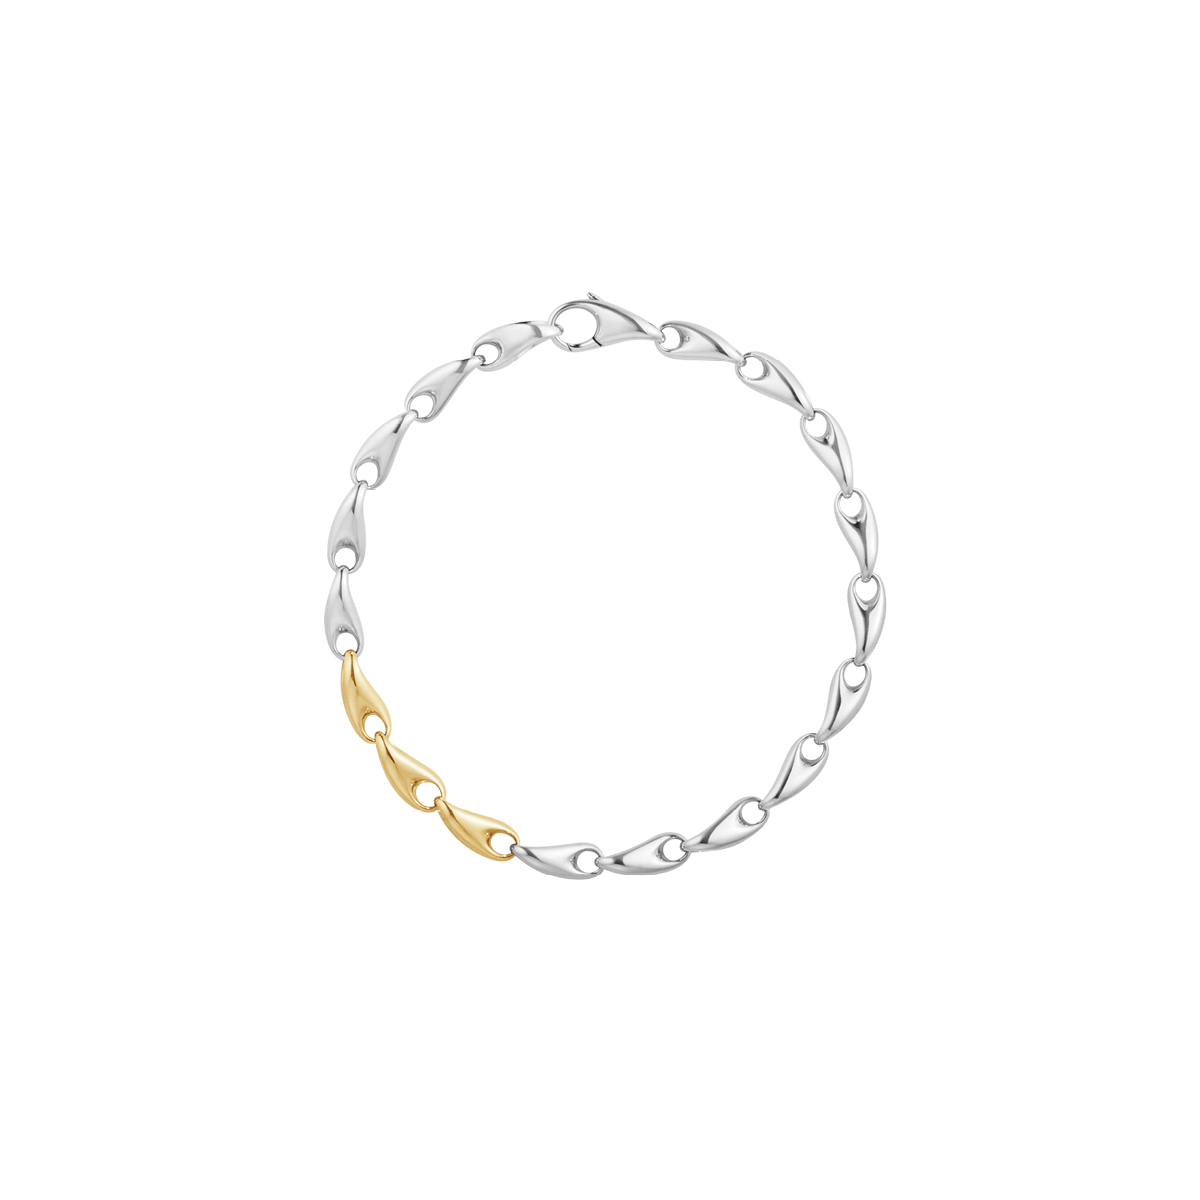 georg jensen reflect bracelet slim in silver and 18ct yellow gold 20001182000m